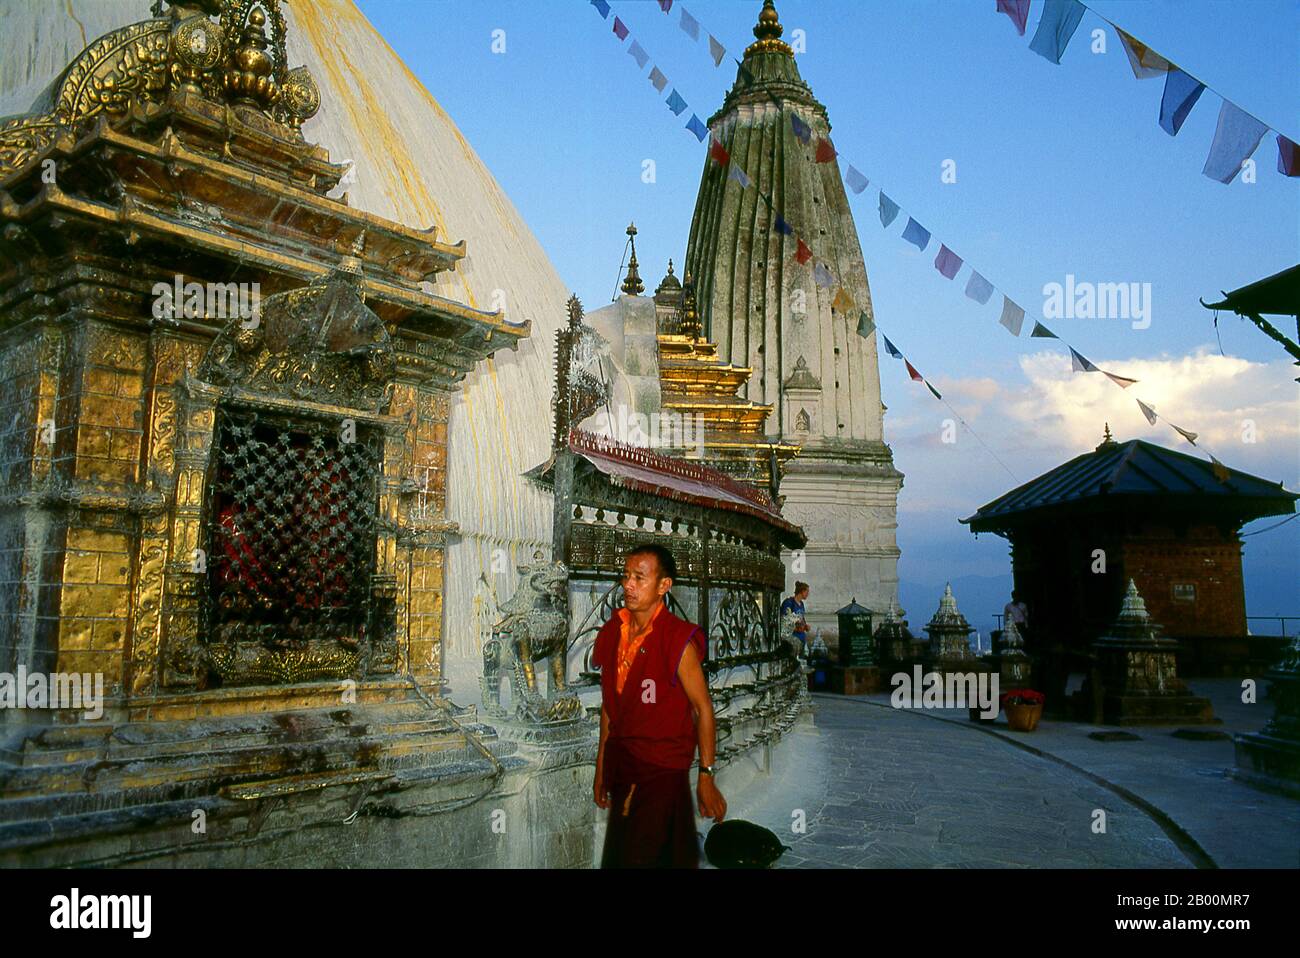 Nepal: Monk circumambulates the main stupa, Swayambhunath (Monkey Temple), Kathmandu Valley.  The date of construction of the Svayambhunath stupa, its origins steeped in myth, is unknown. According to the inscriptions on an ancient and damaged stone tablet at Svayambhunath, King Vrishadeva (ca. 400 CE) was the first to build a place of worship on the site. His grandson, King Manadeva I (ca. 464-505) may have made some additions.  The Muslim invasion of 1349 undid all the pious building work, the marauding Muslim warriors dismantling every kafir (infidel) sanctuary that they came across. Stock Photo